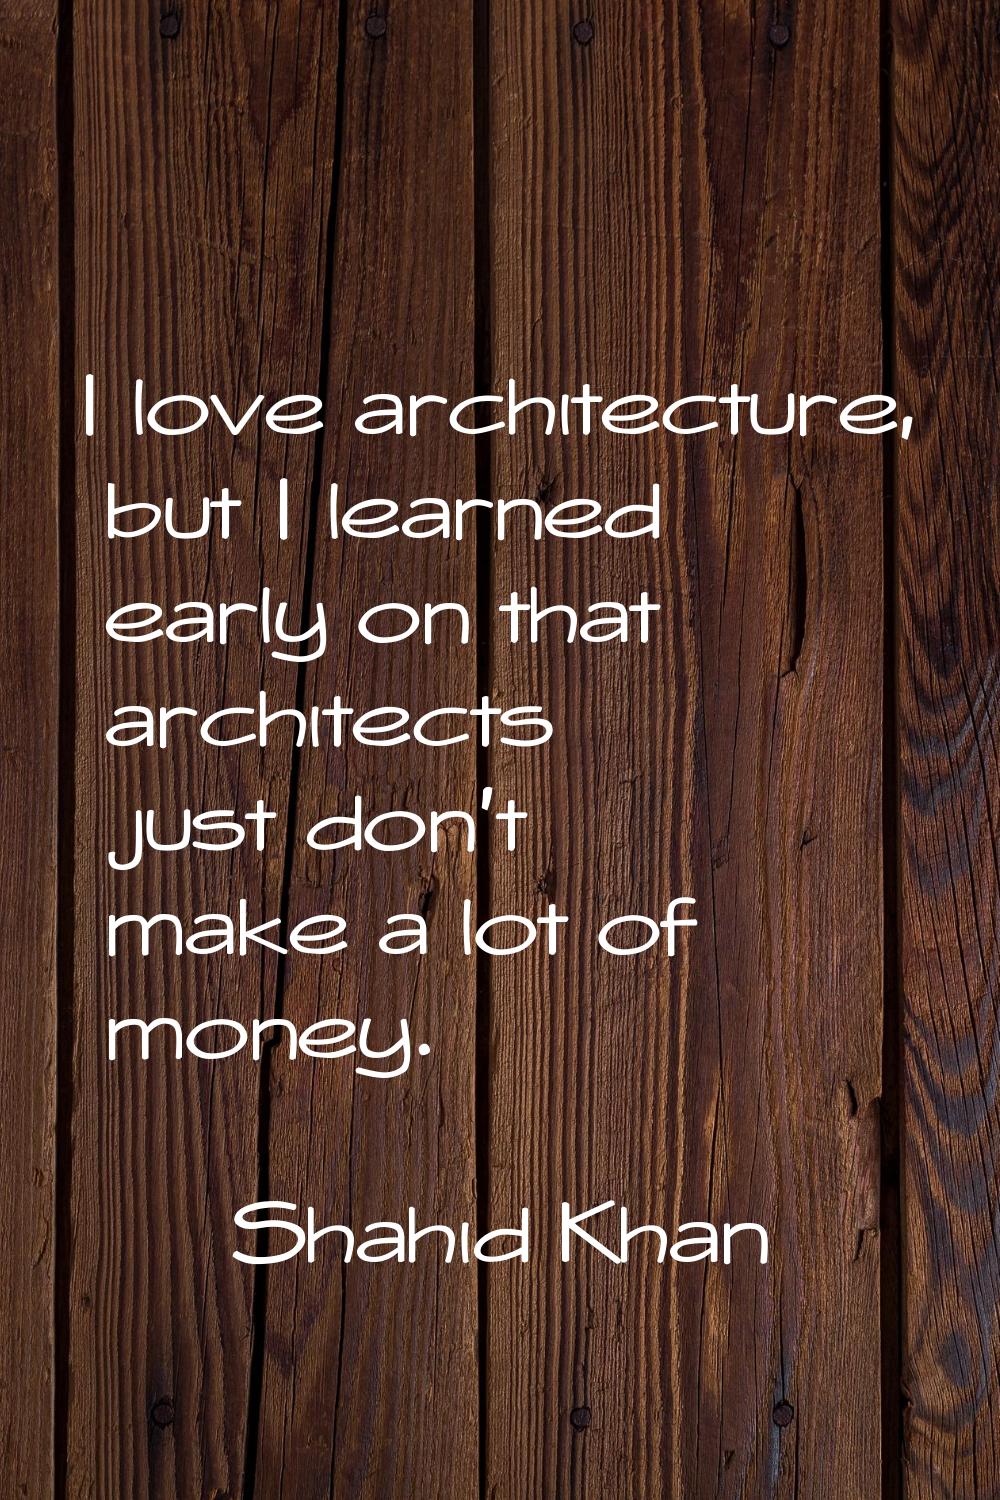 I love architecture, but I learned early on that architects just don't make a lot of money.